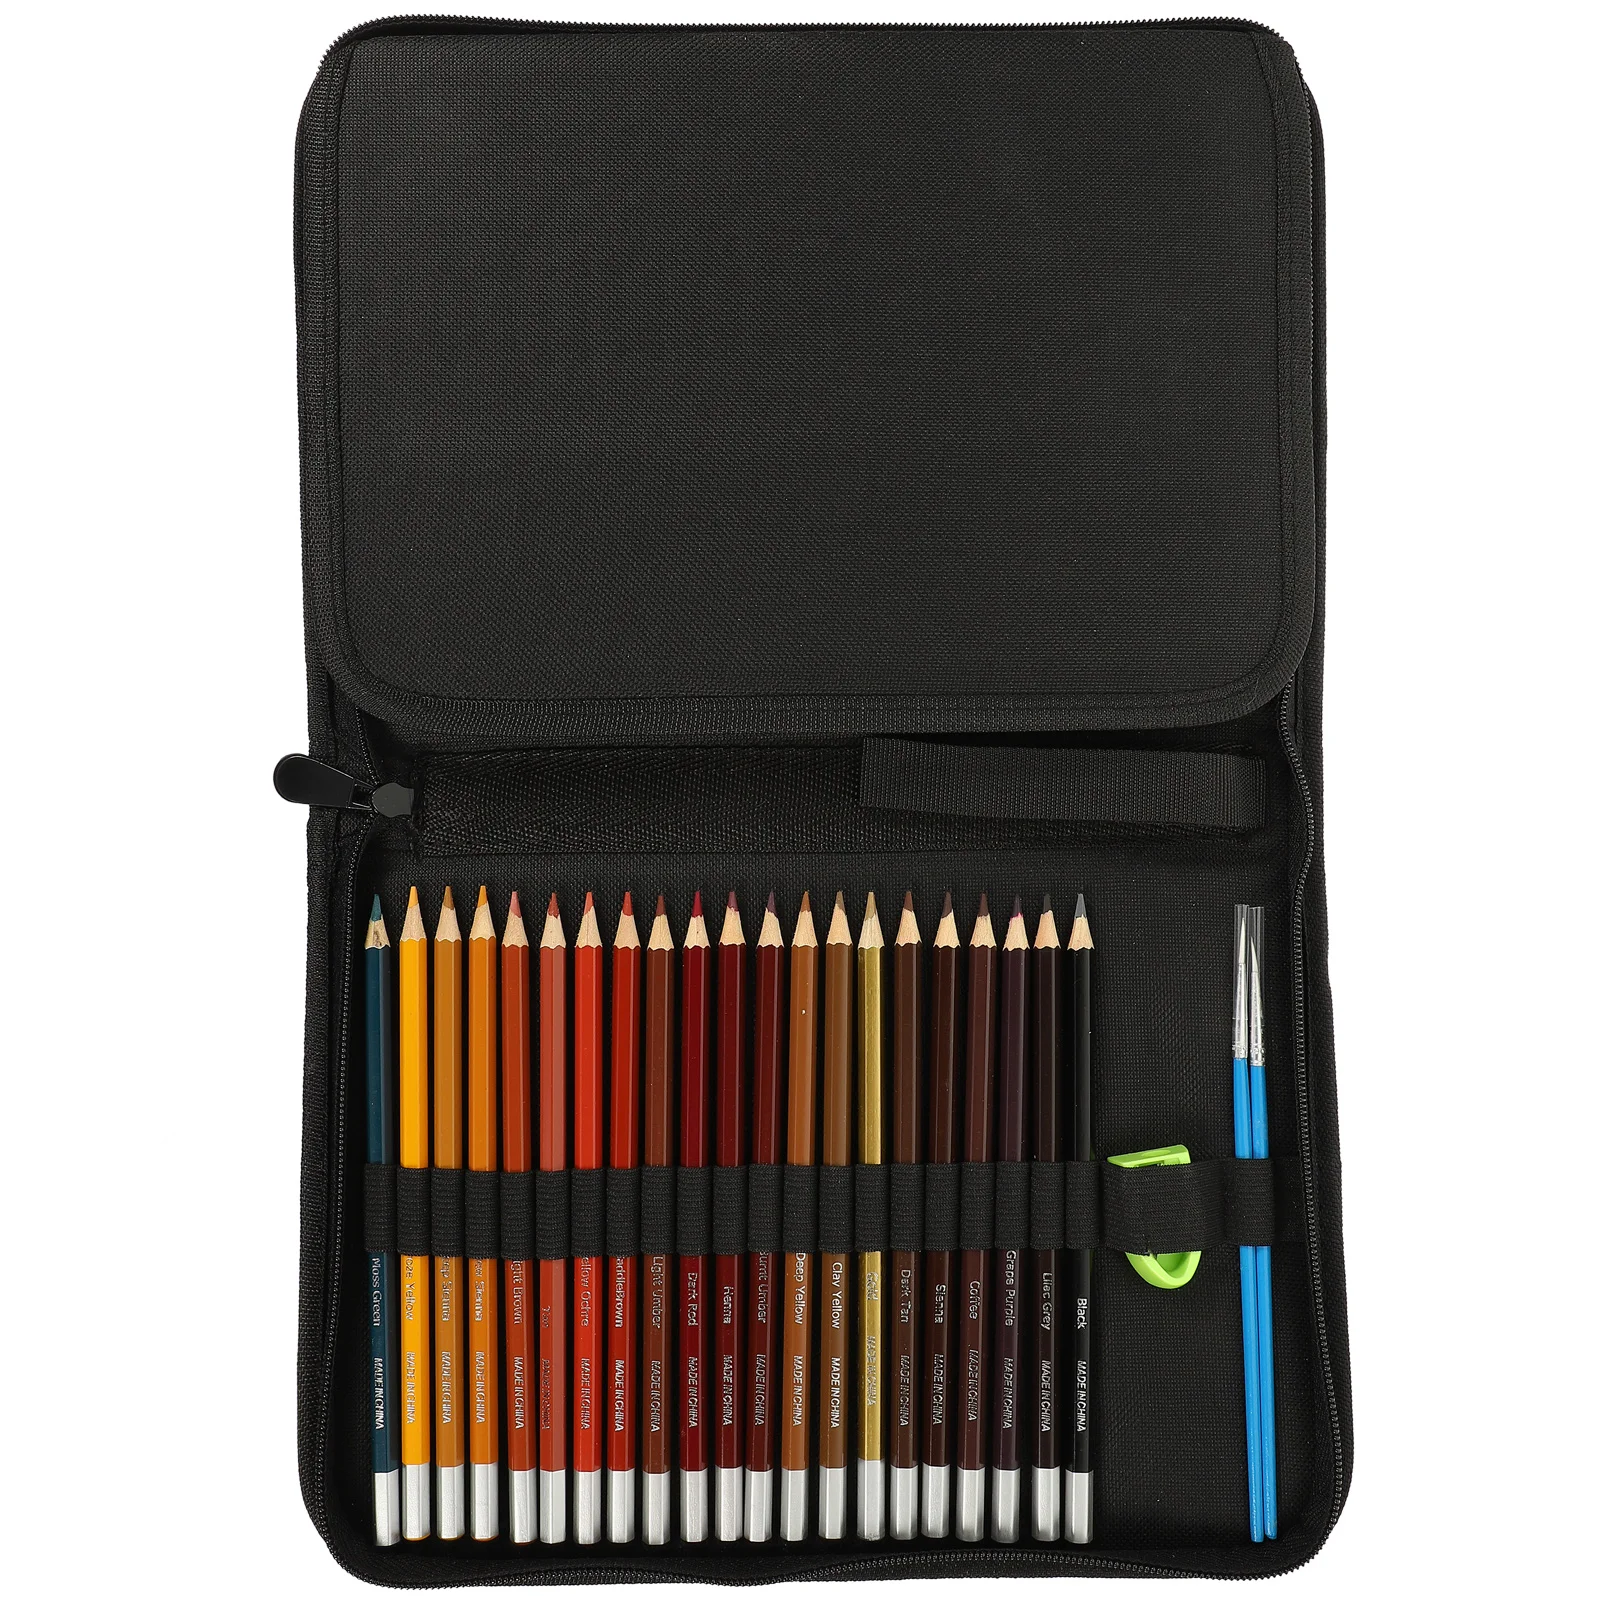 

1 Set Crafting Painting Artist Colored Pencils Sketching Drawing Pencils Graffiti Kids Pencils for Coloring Artist Drawing